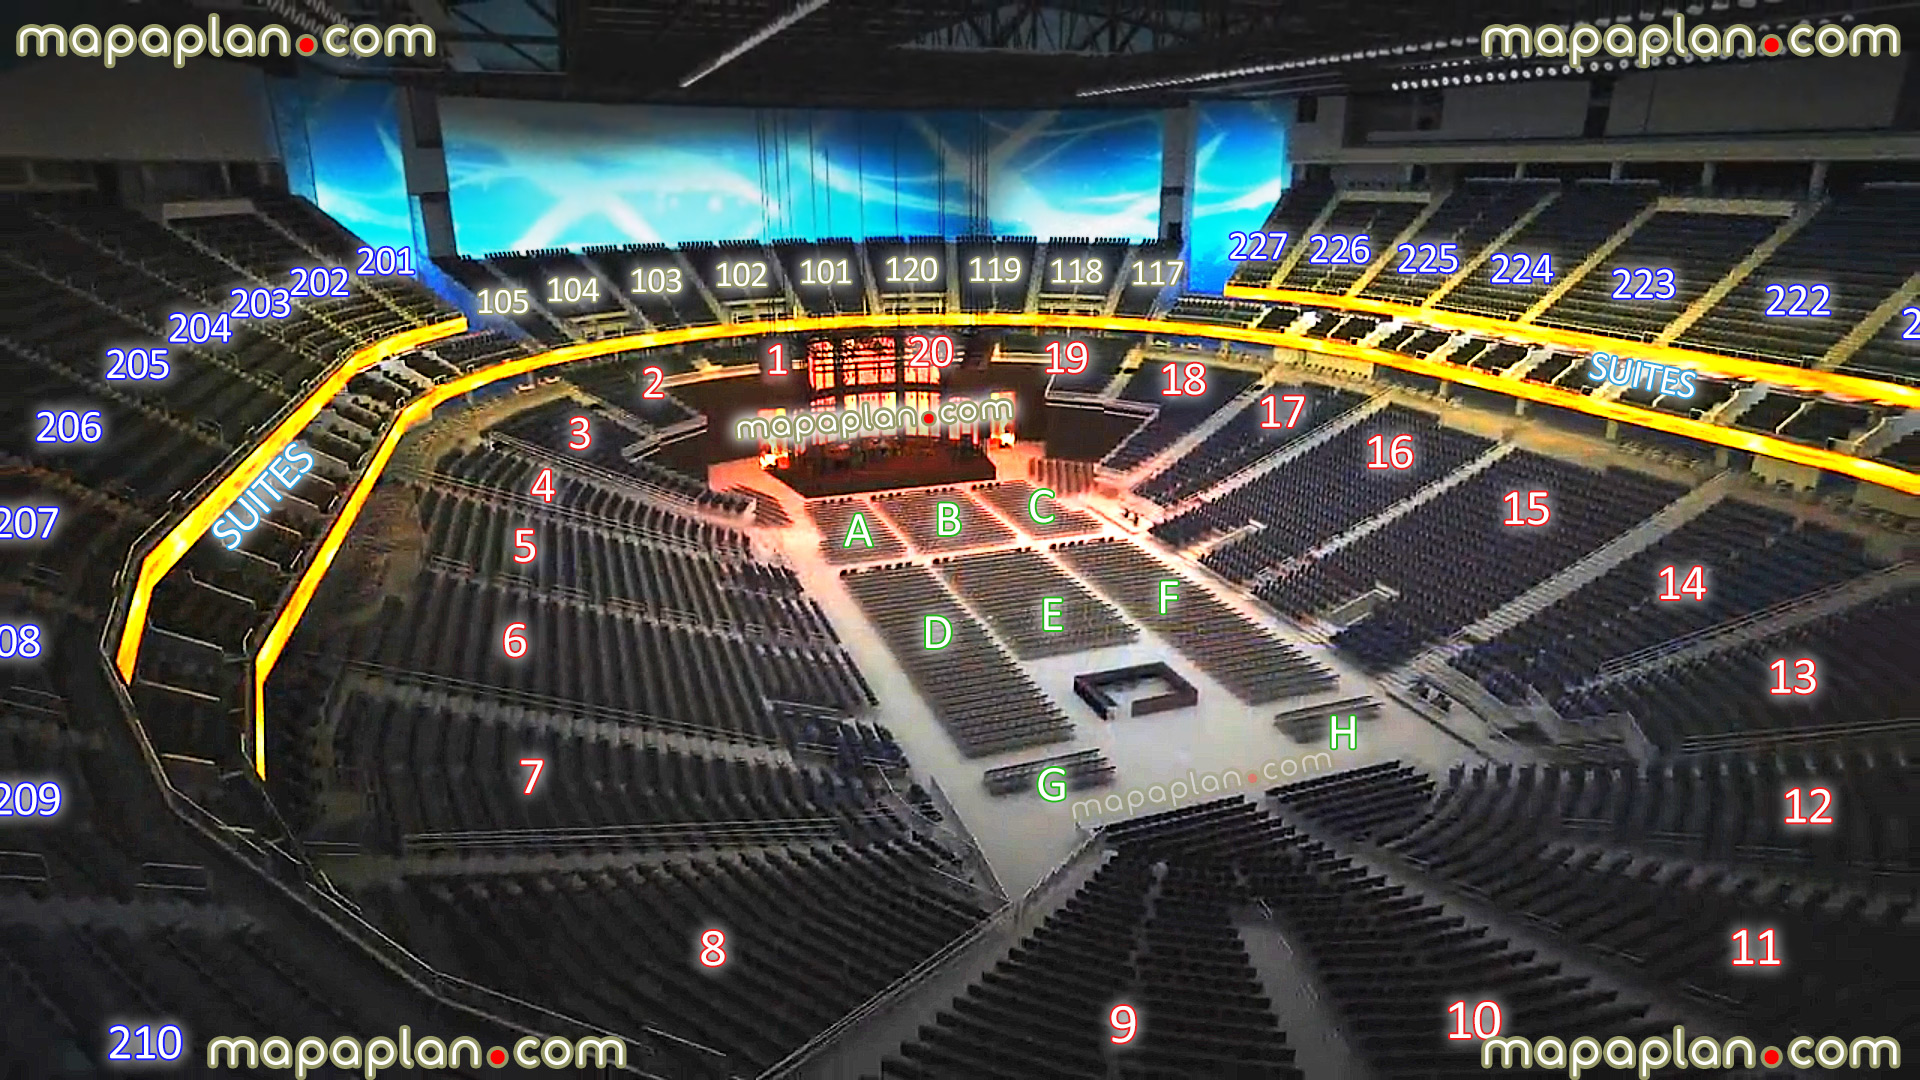 T Mobile Arena Seating Map Maping Resources